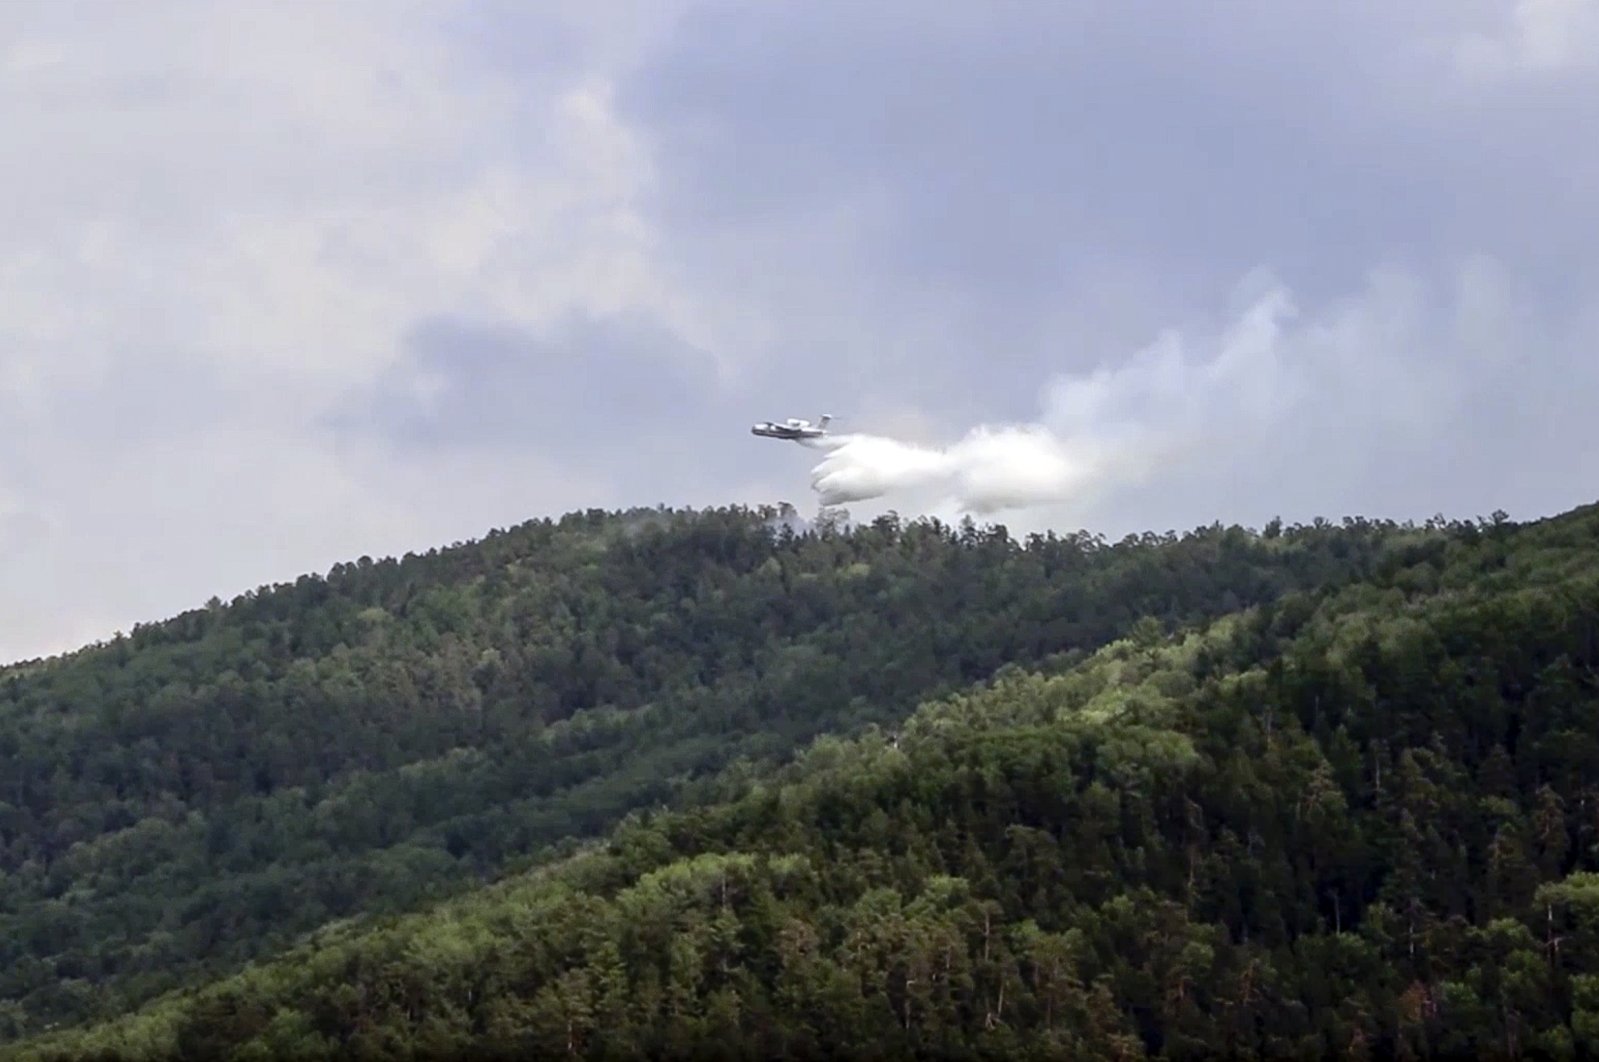 In this file image taken from a video provided by the Russian Emergency Ministry, a multipurpose amphibious aircraft releases water to extinguish a fire in the Trans-Baikal National Park in Buryatia, southern Siberia, Russia on July 10, 2020. (AP Photo)